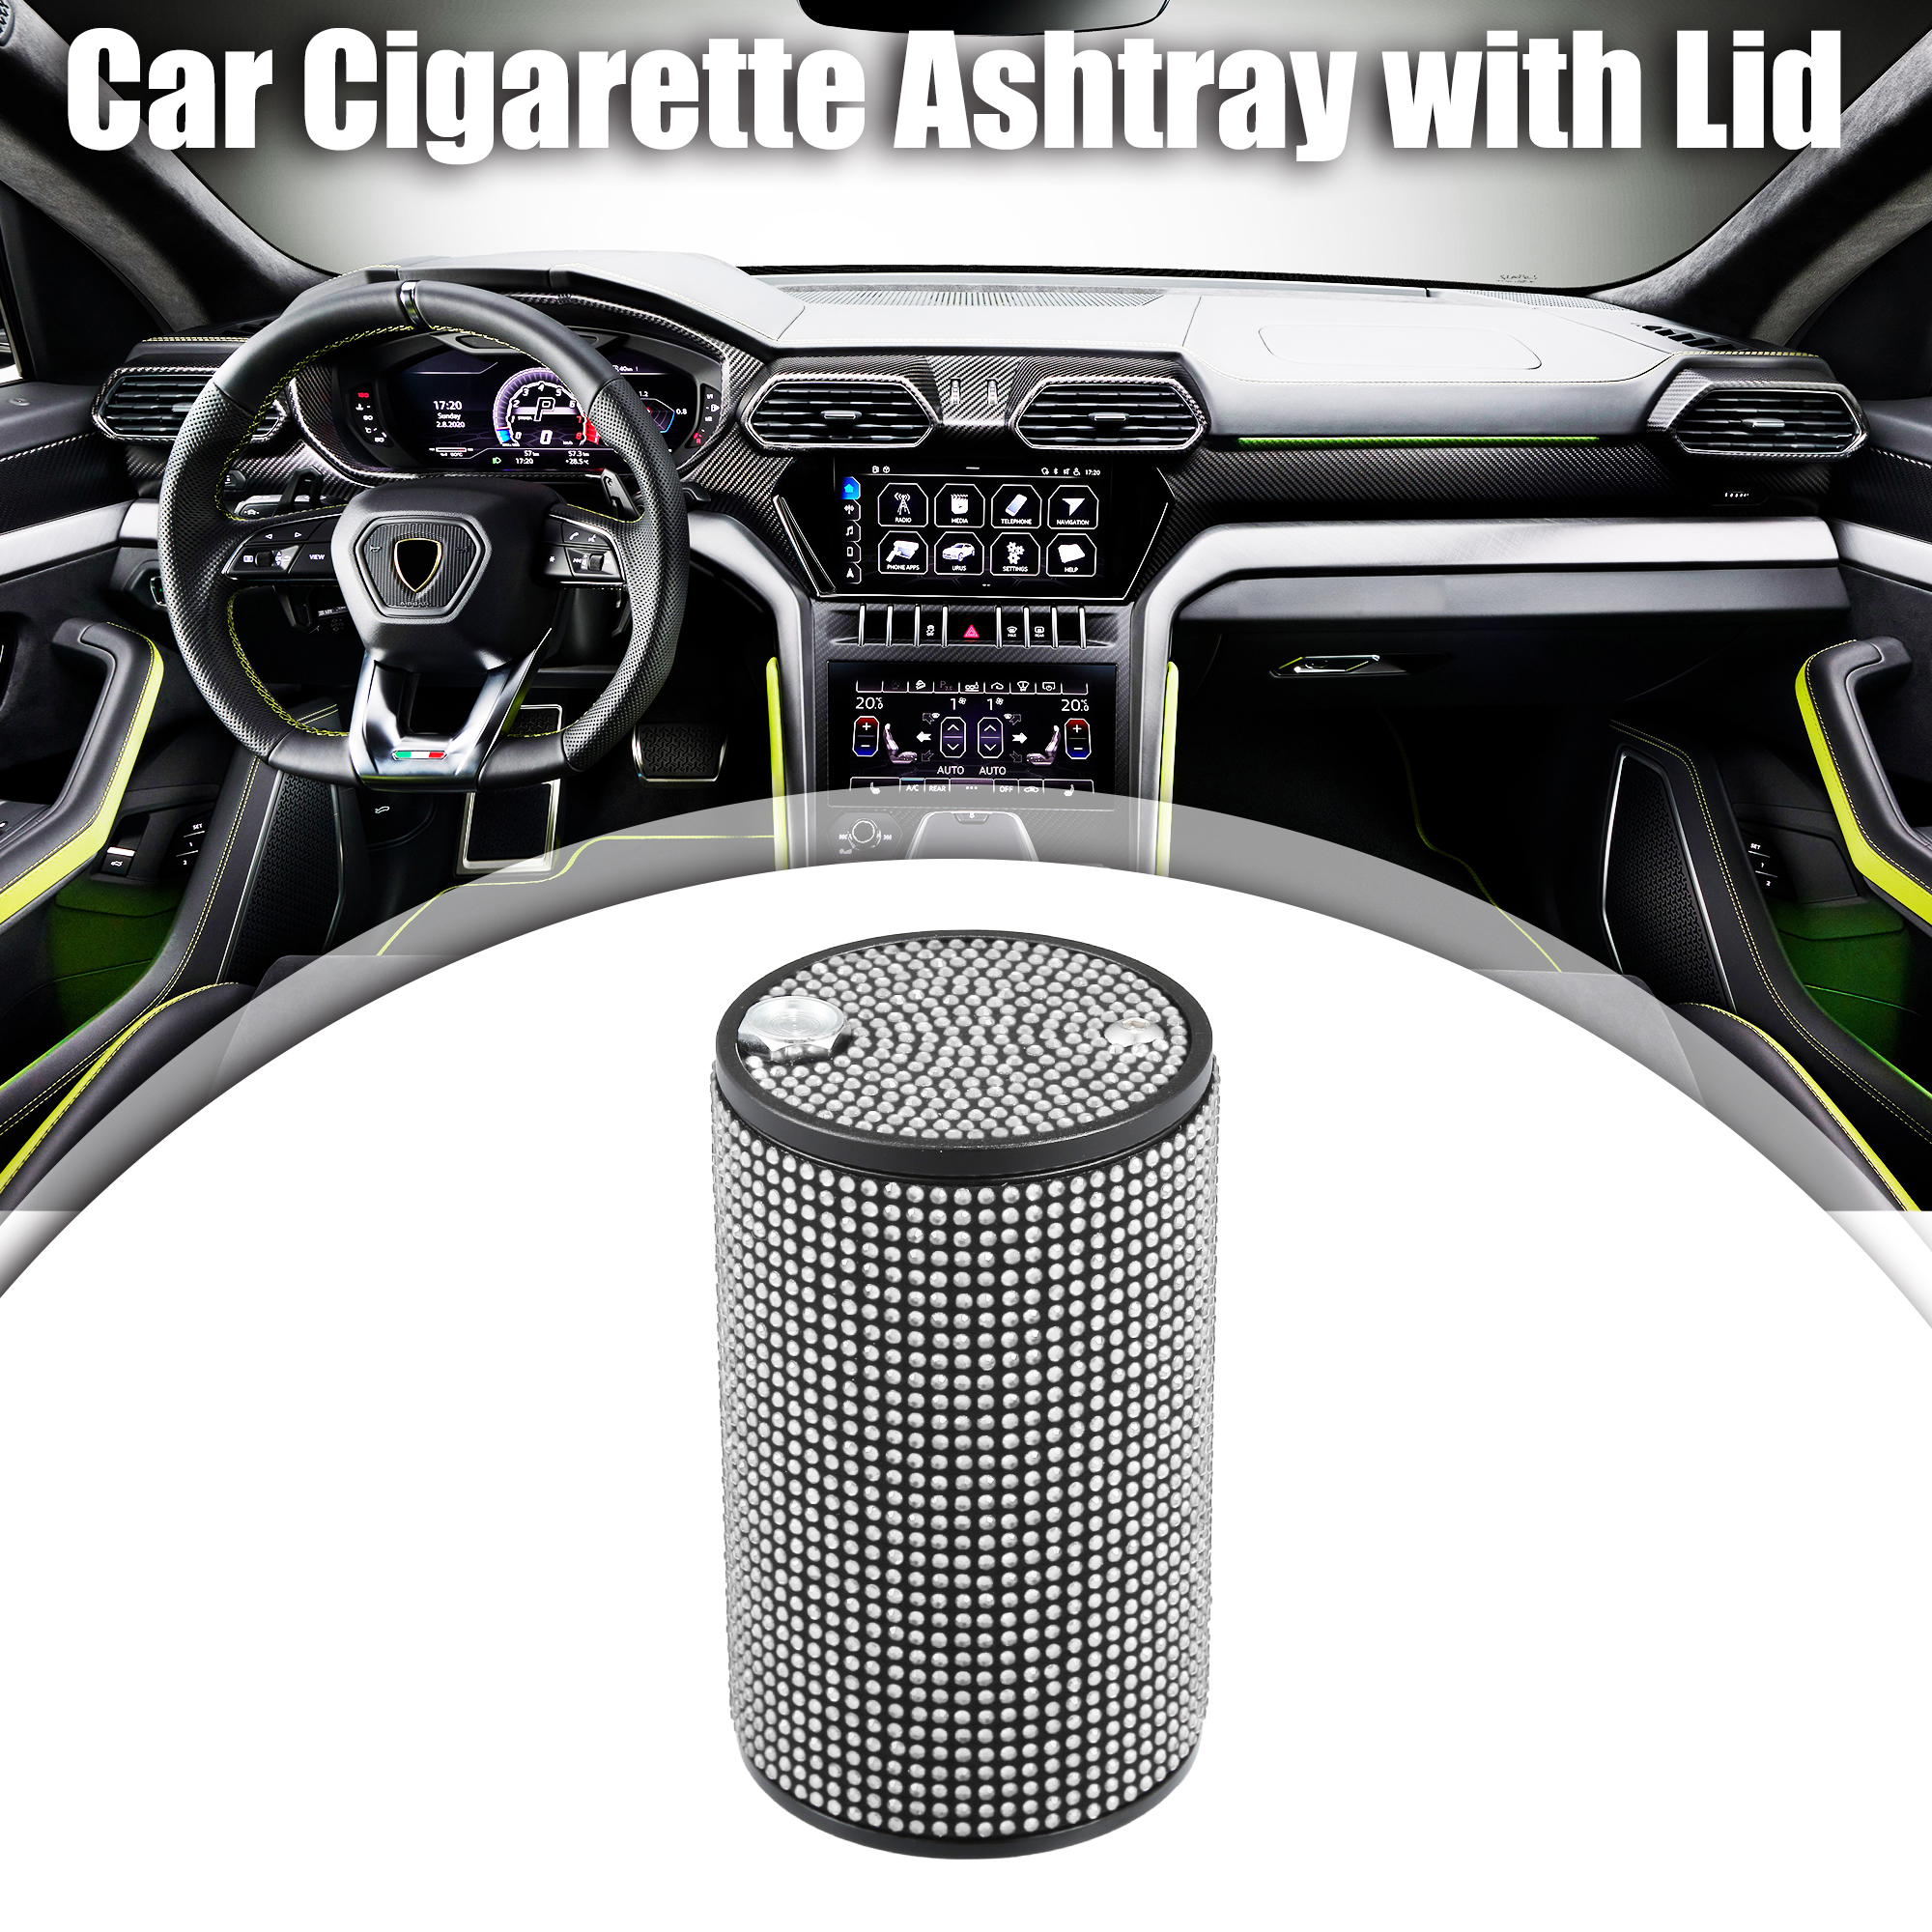 Unique Bargains Bling Car Cigarette Ashtray Car Ashtray with Lid Smell Proof White Rhinestone